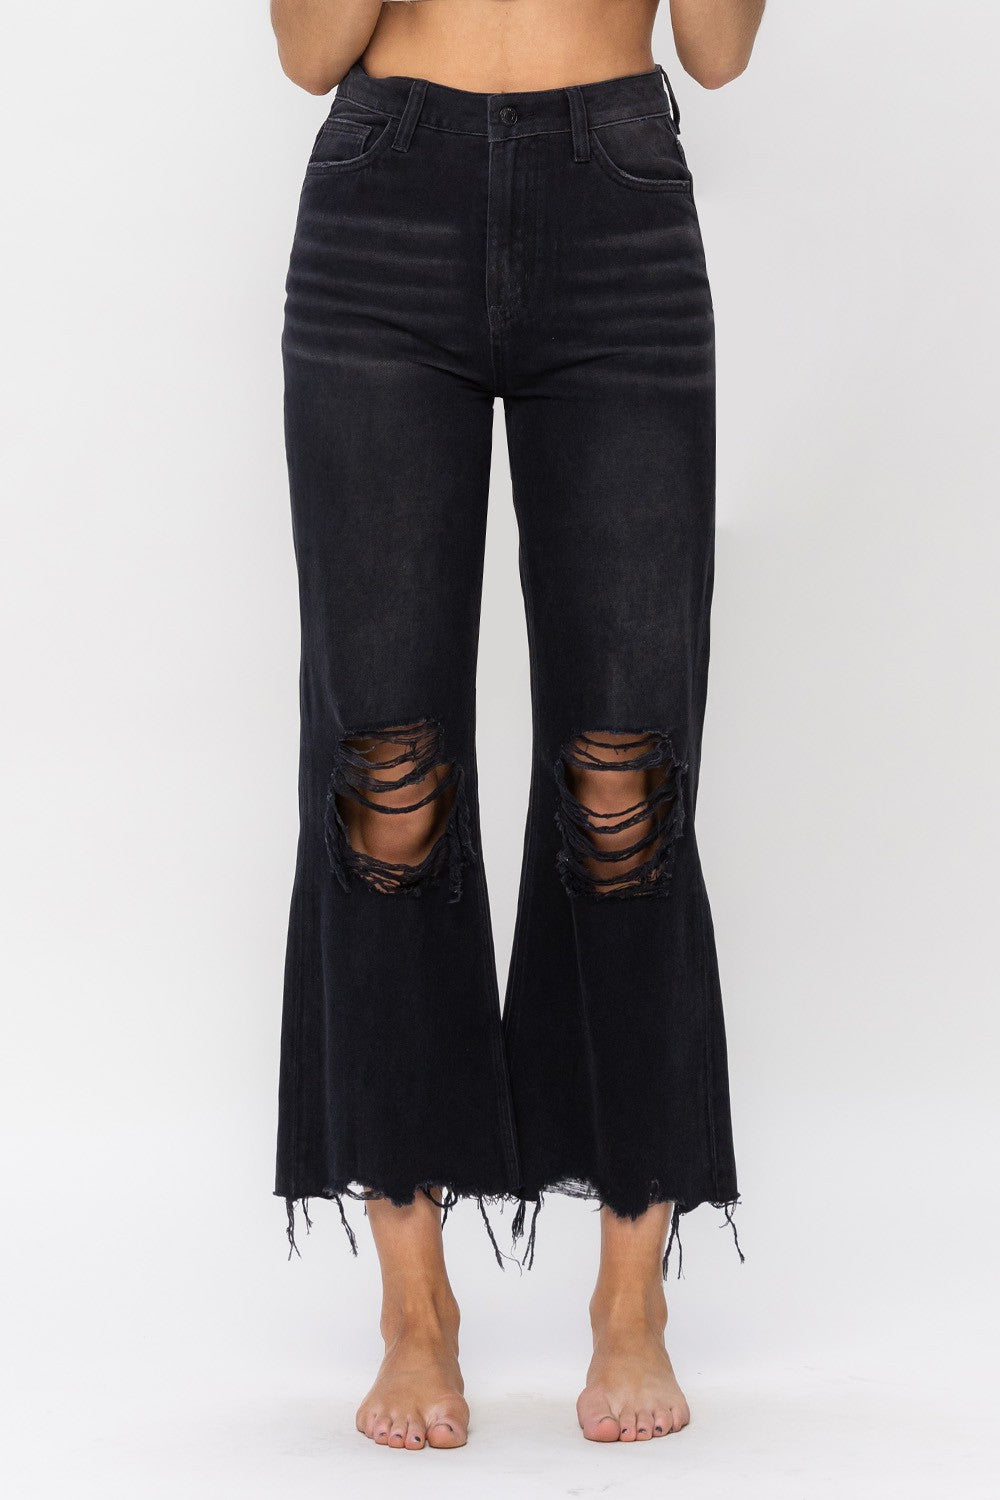 High Rise Cropped Flare Distressed Jeans in Black - Our Stuff